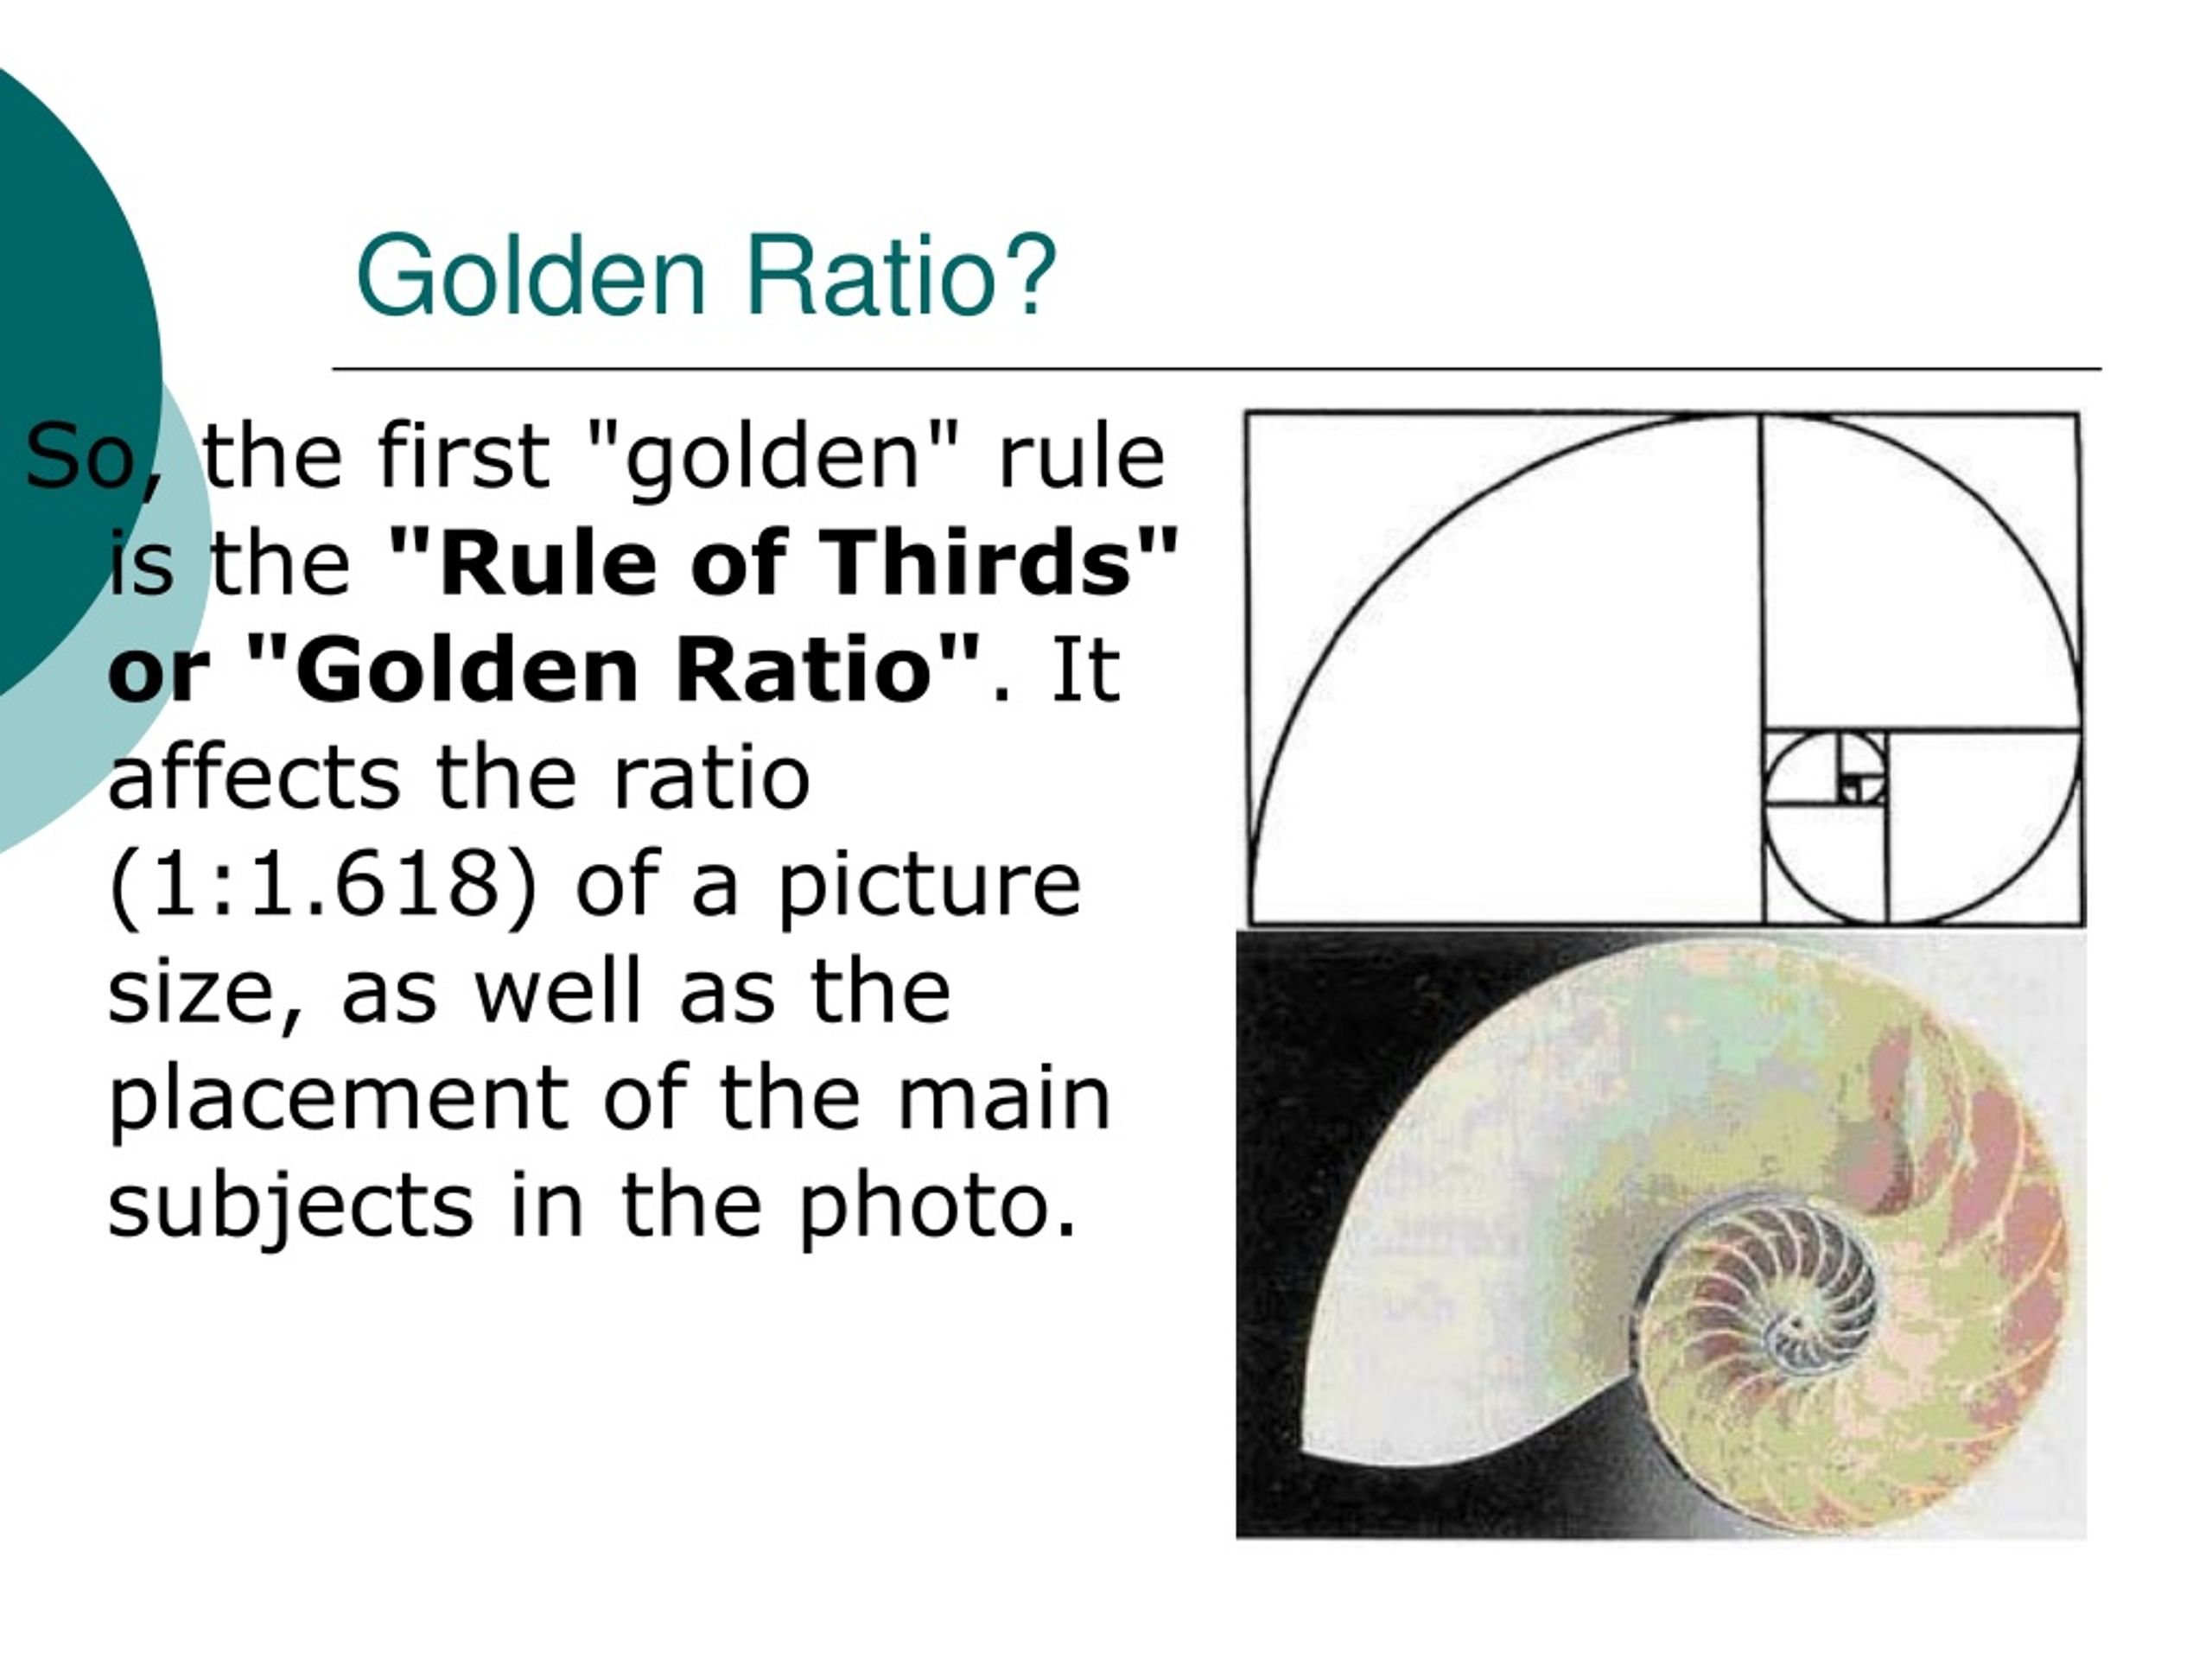 Ppt How Does The Golden Ratio Impact On Photography Powerpoint Presentation Id208064